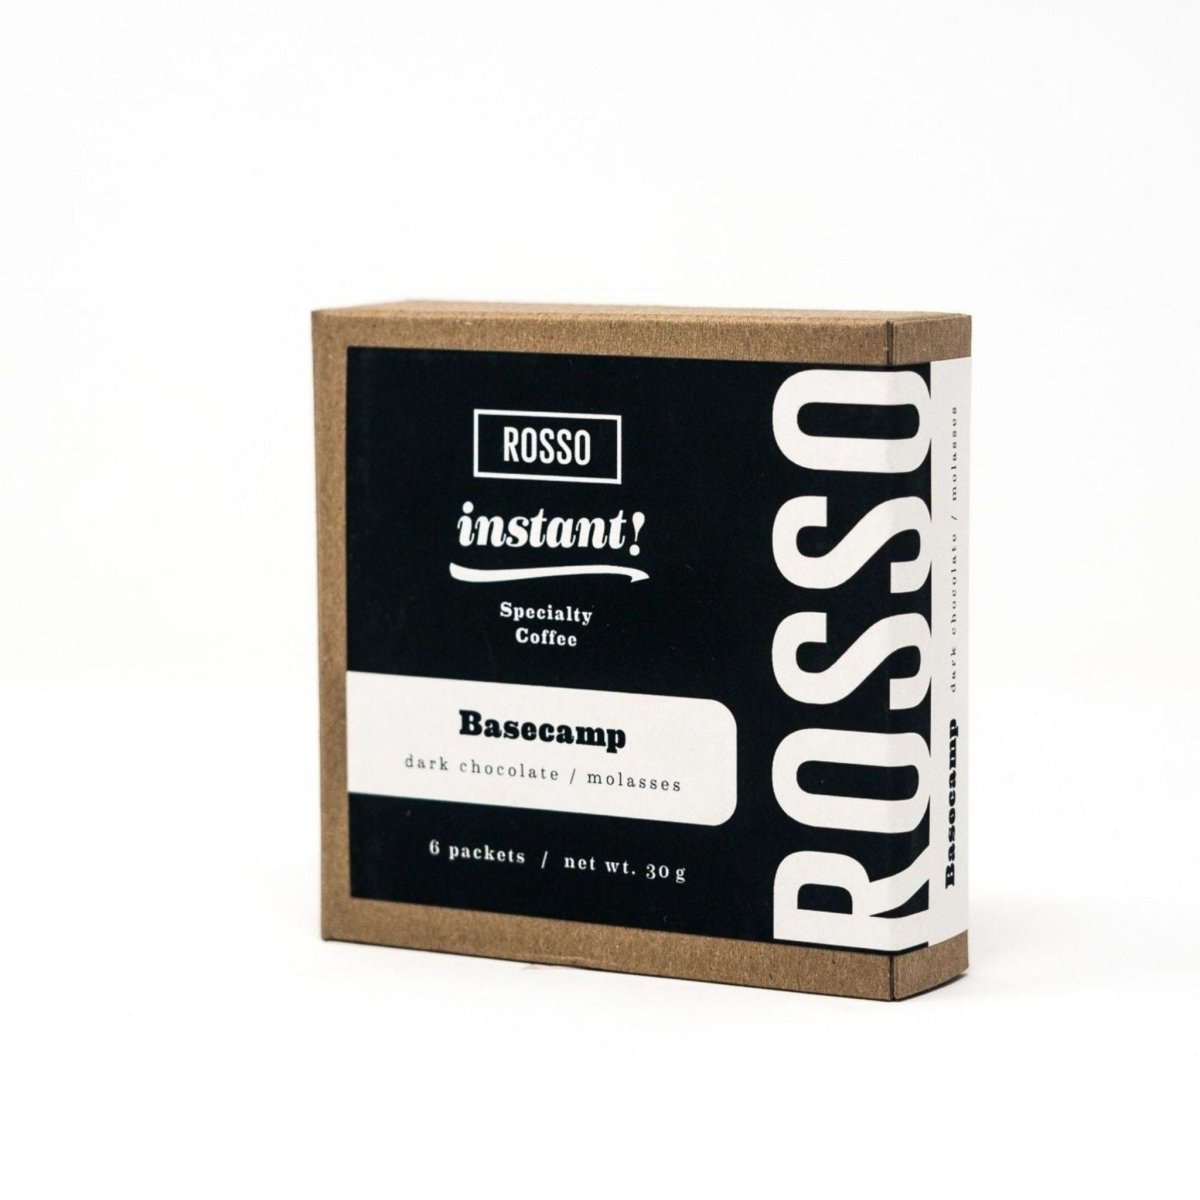 GotoPopupYYC - Rosso Coffee Roasters - Basecamp - Instant Coffee - 6 sachets -ROSSO-BCIC-0001